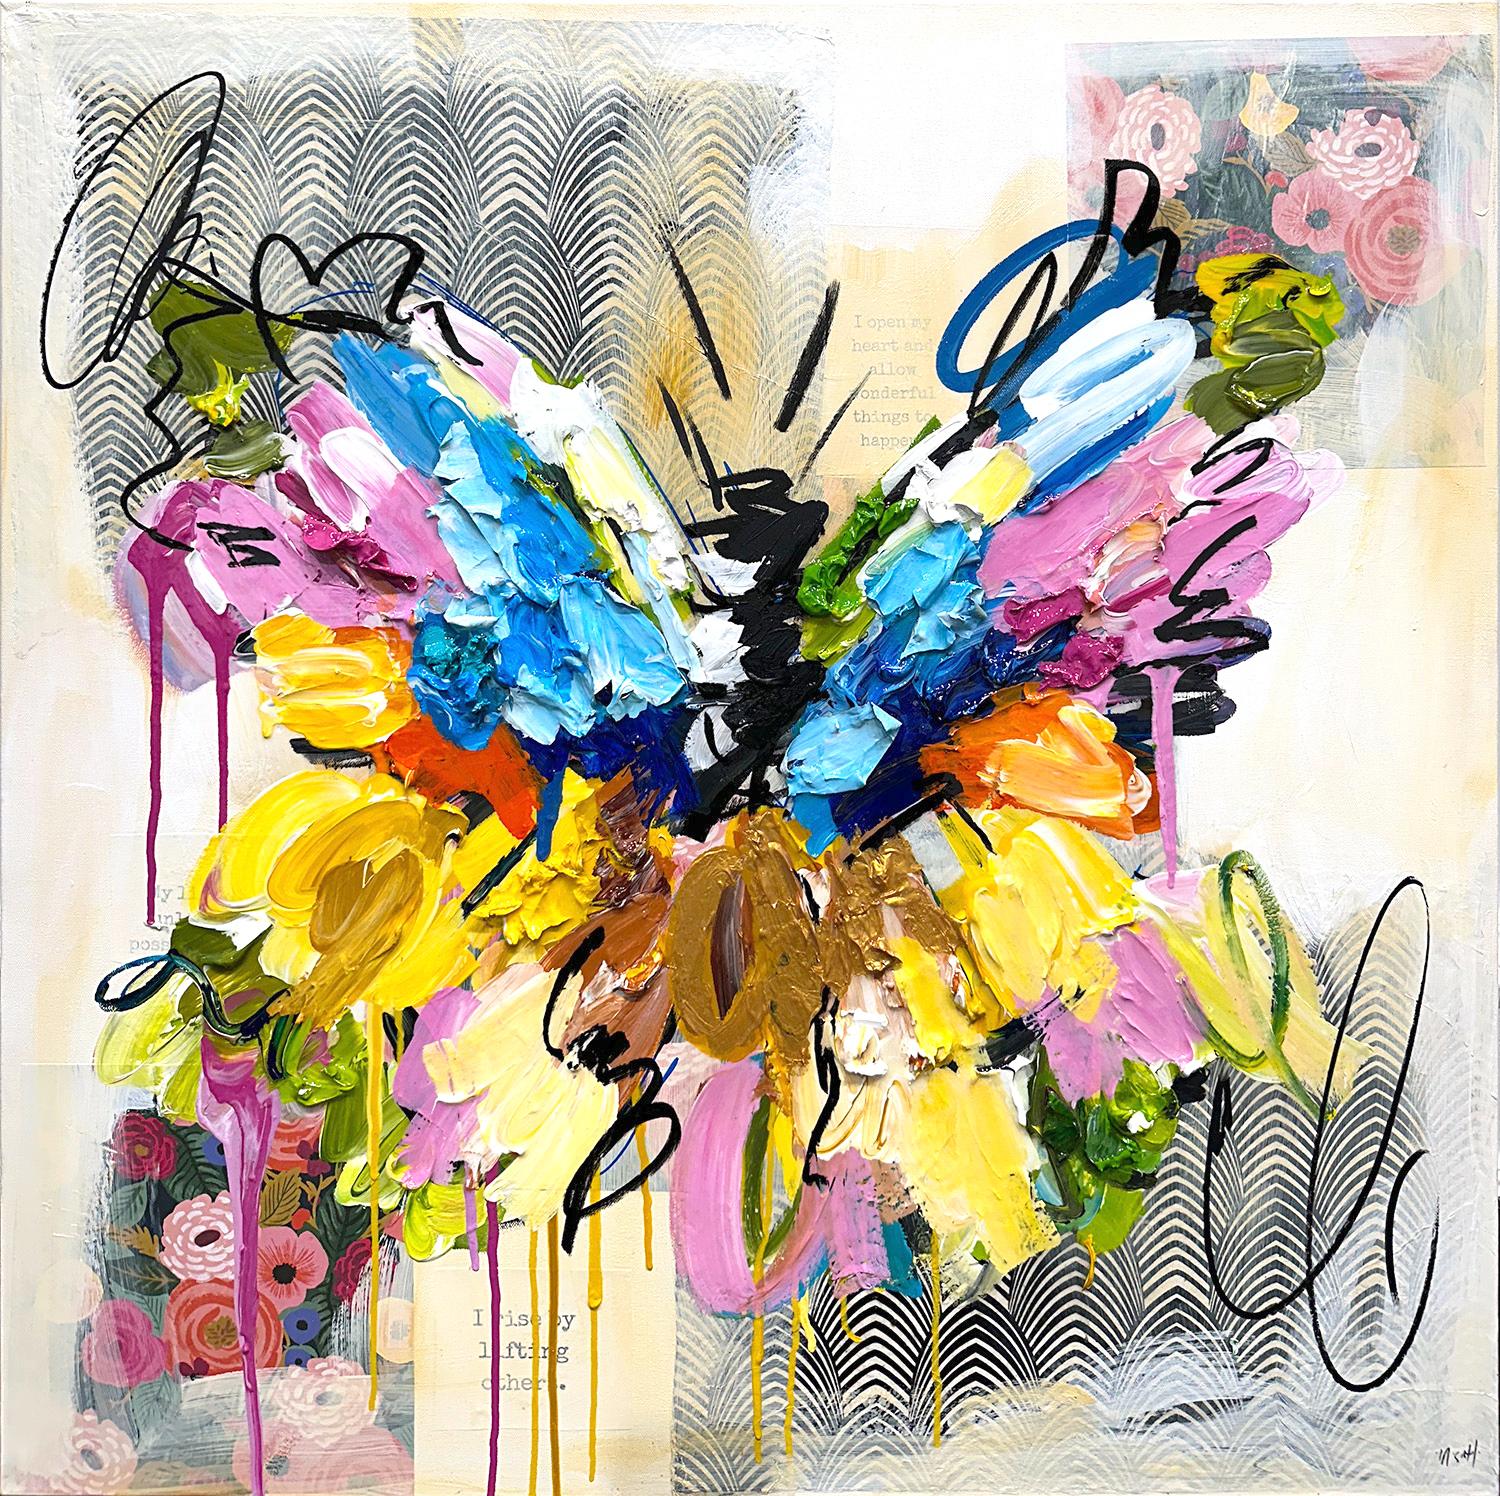 Ash Almonte Figurative Painting - "I Rise by Lifting Others" Colorful Abstract Butterfly Painting Acrylic Canvas